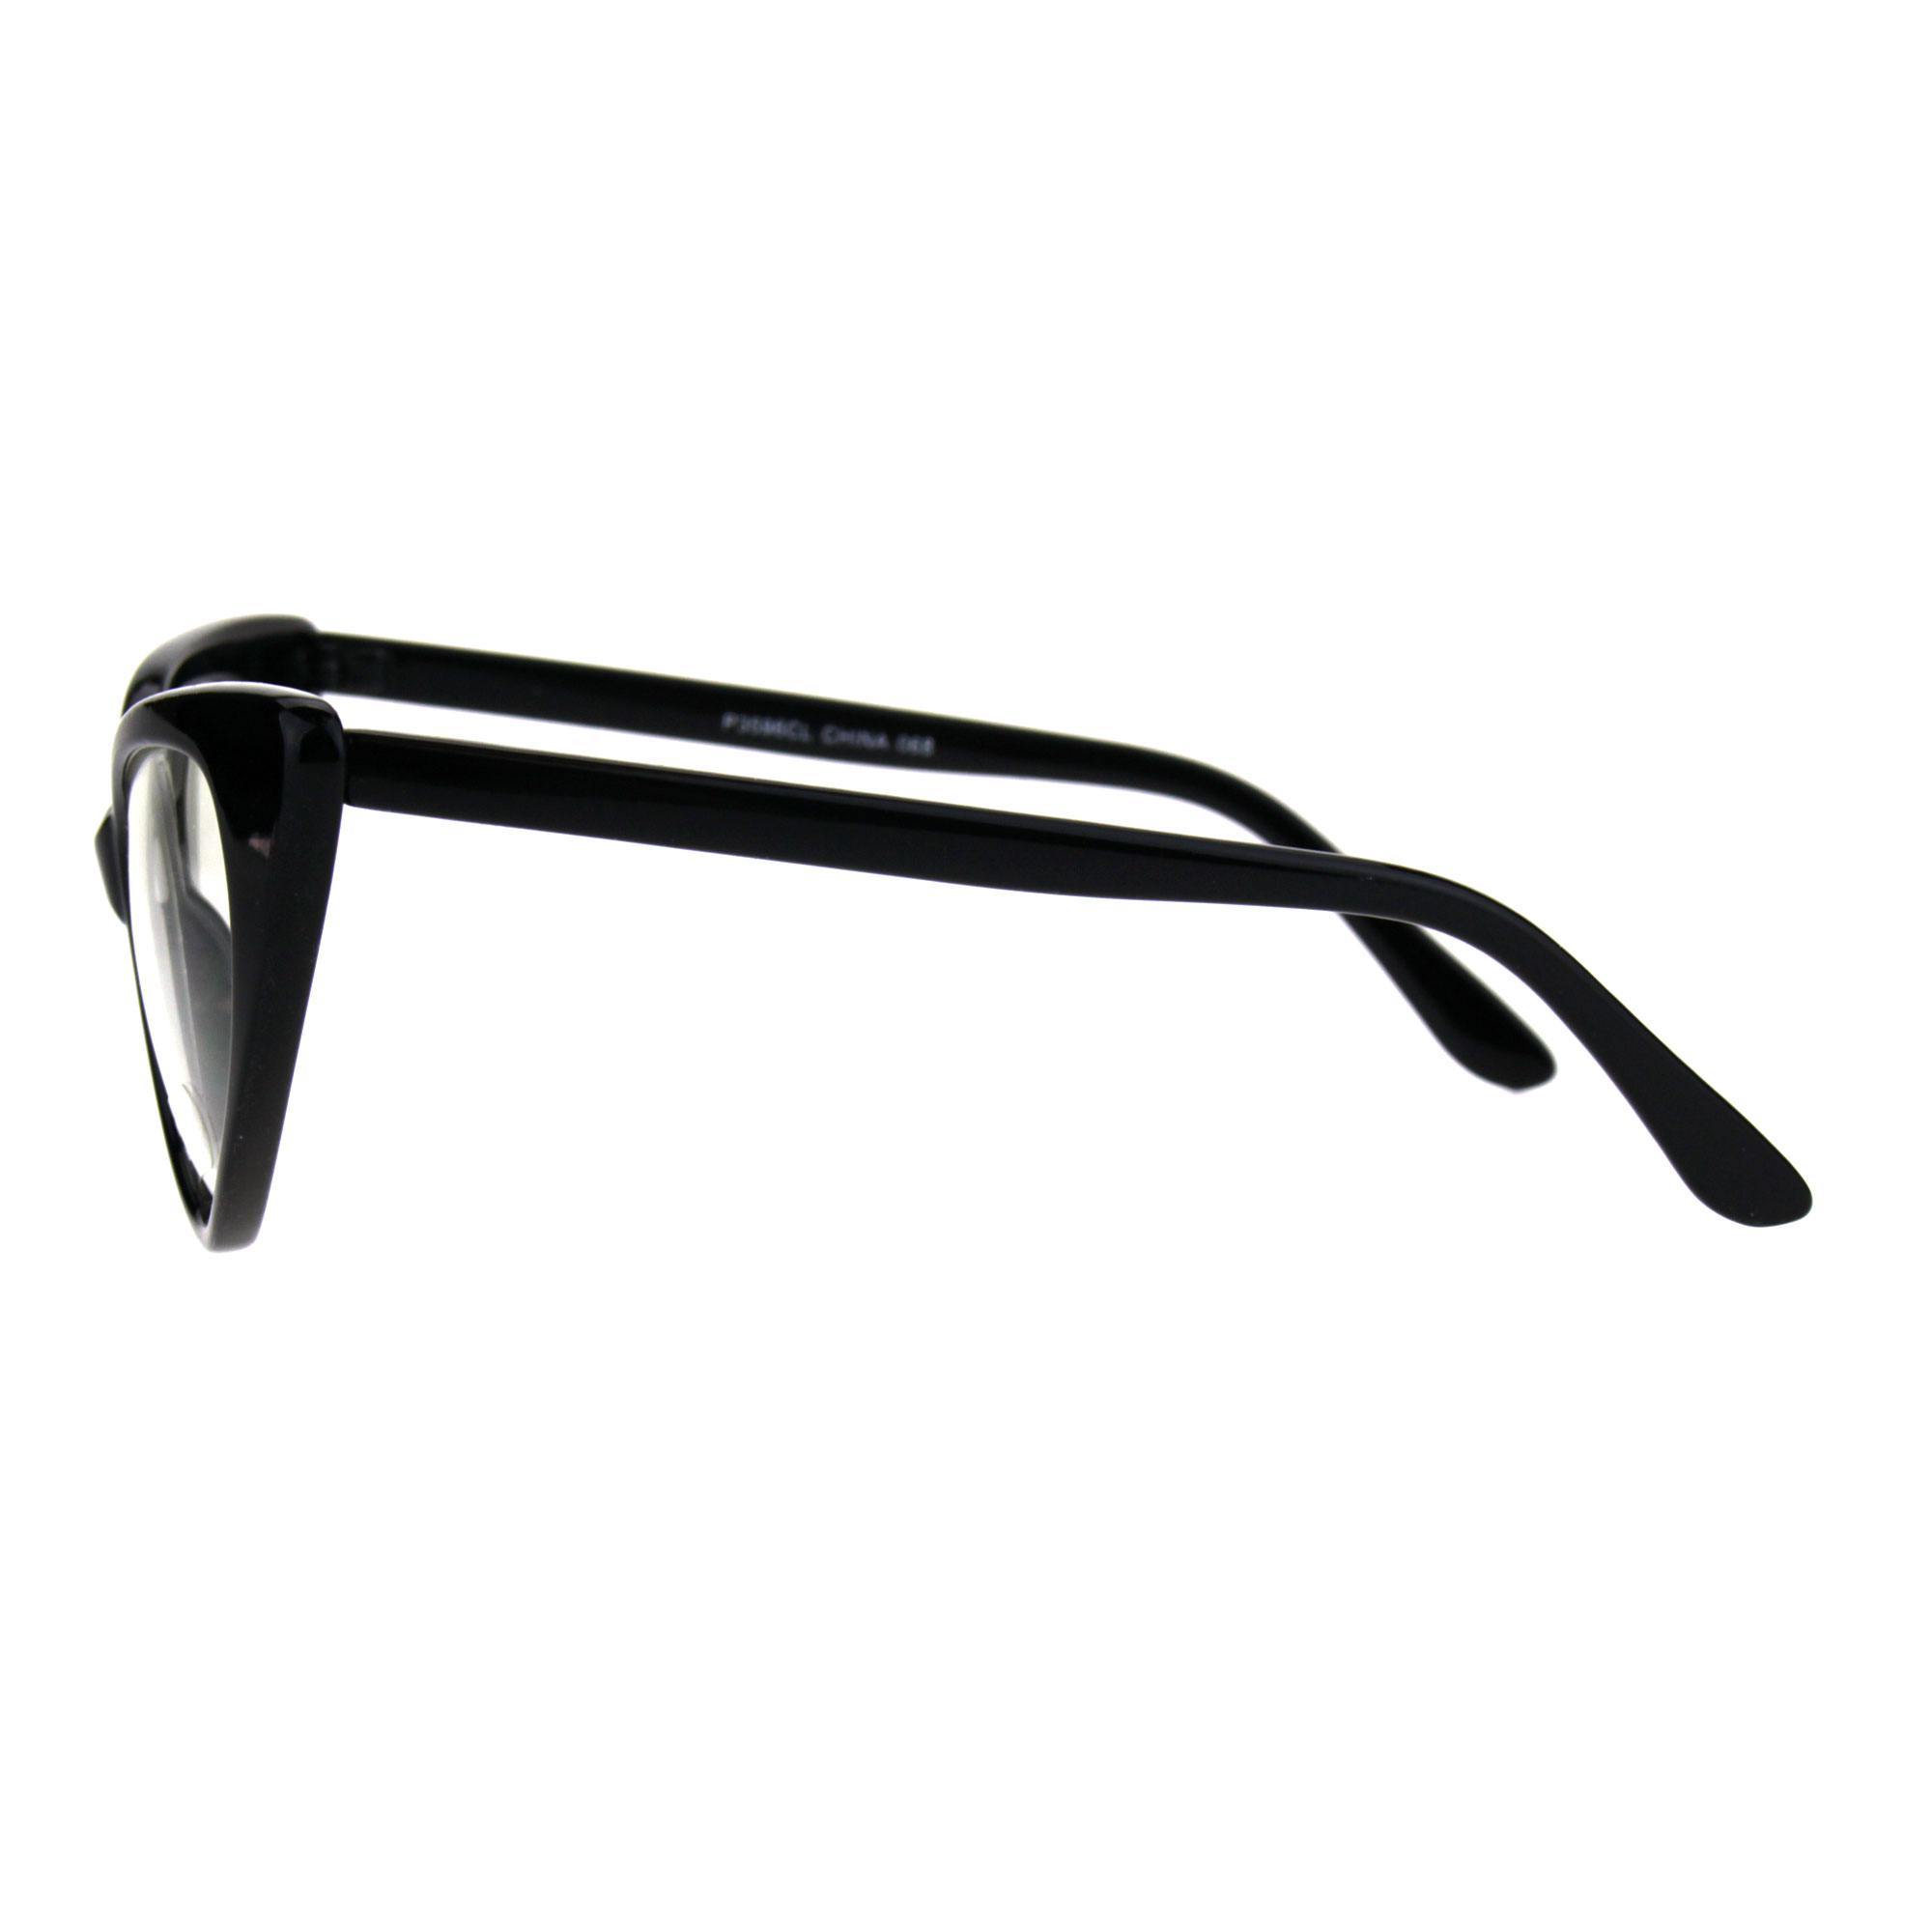 Classic Womens Gothic Clear Lens Cat Eye Glasses Black - image 3 of 3